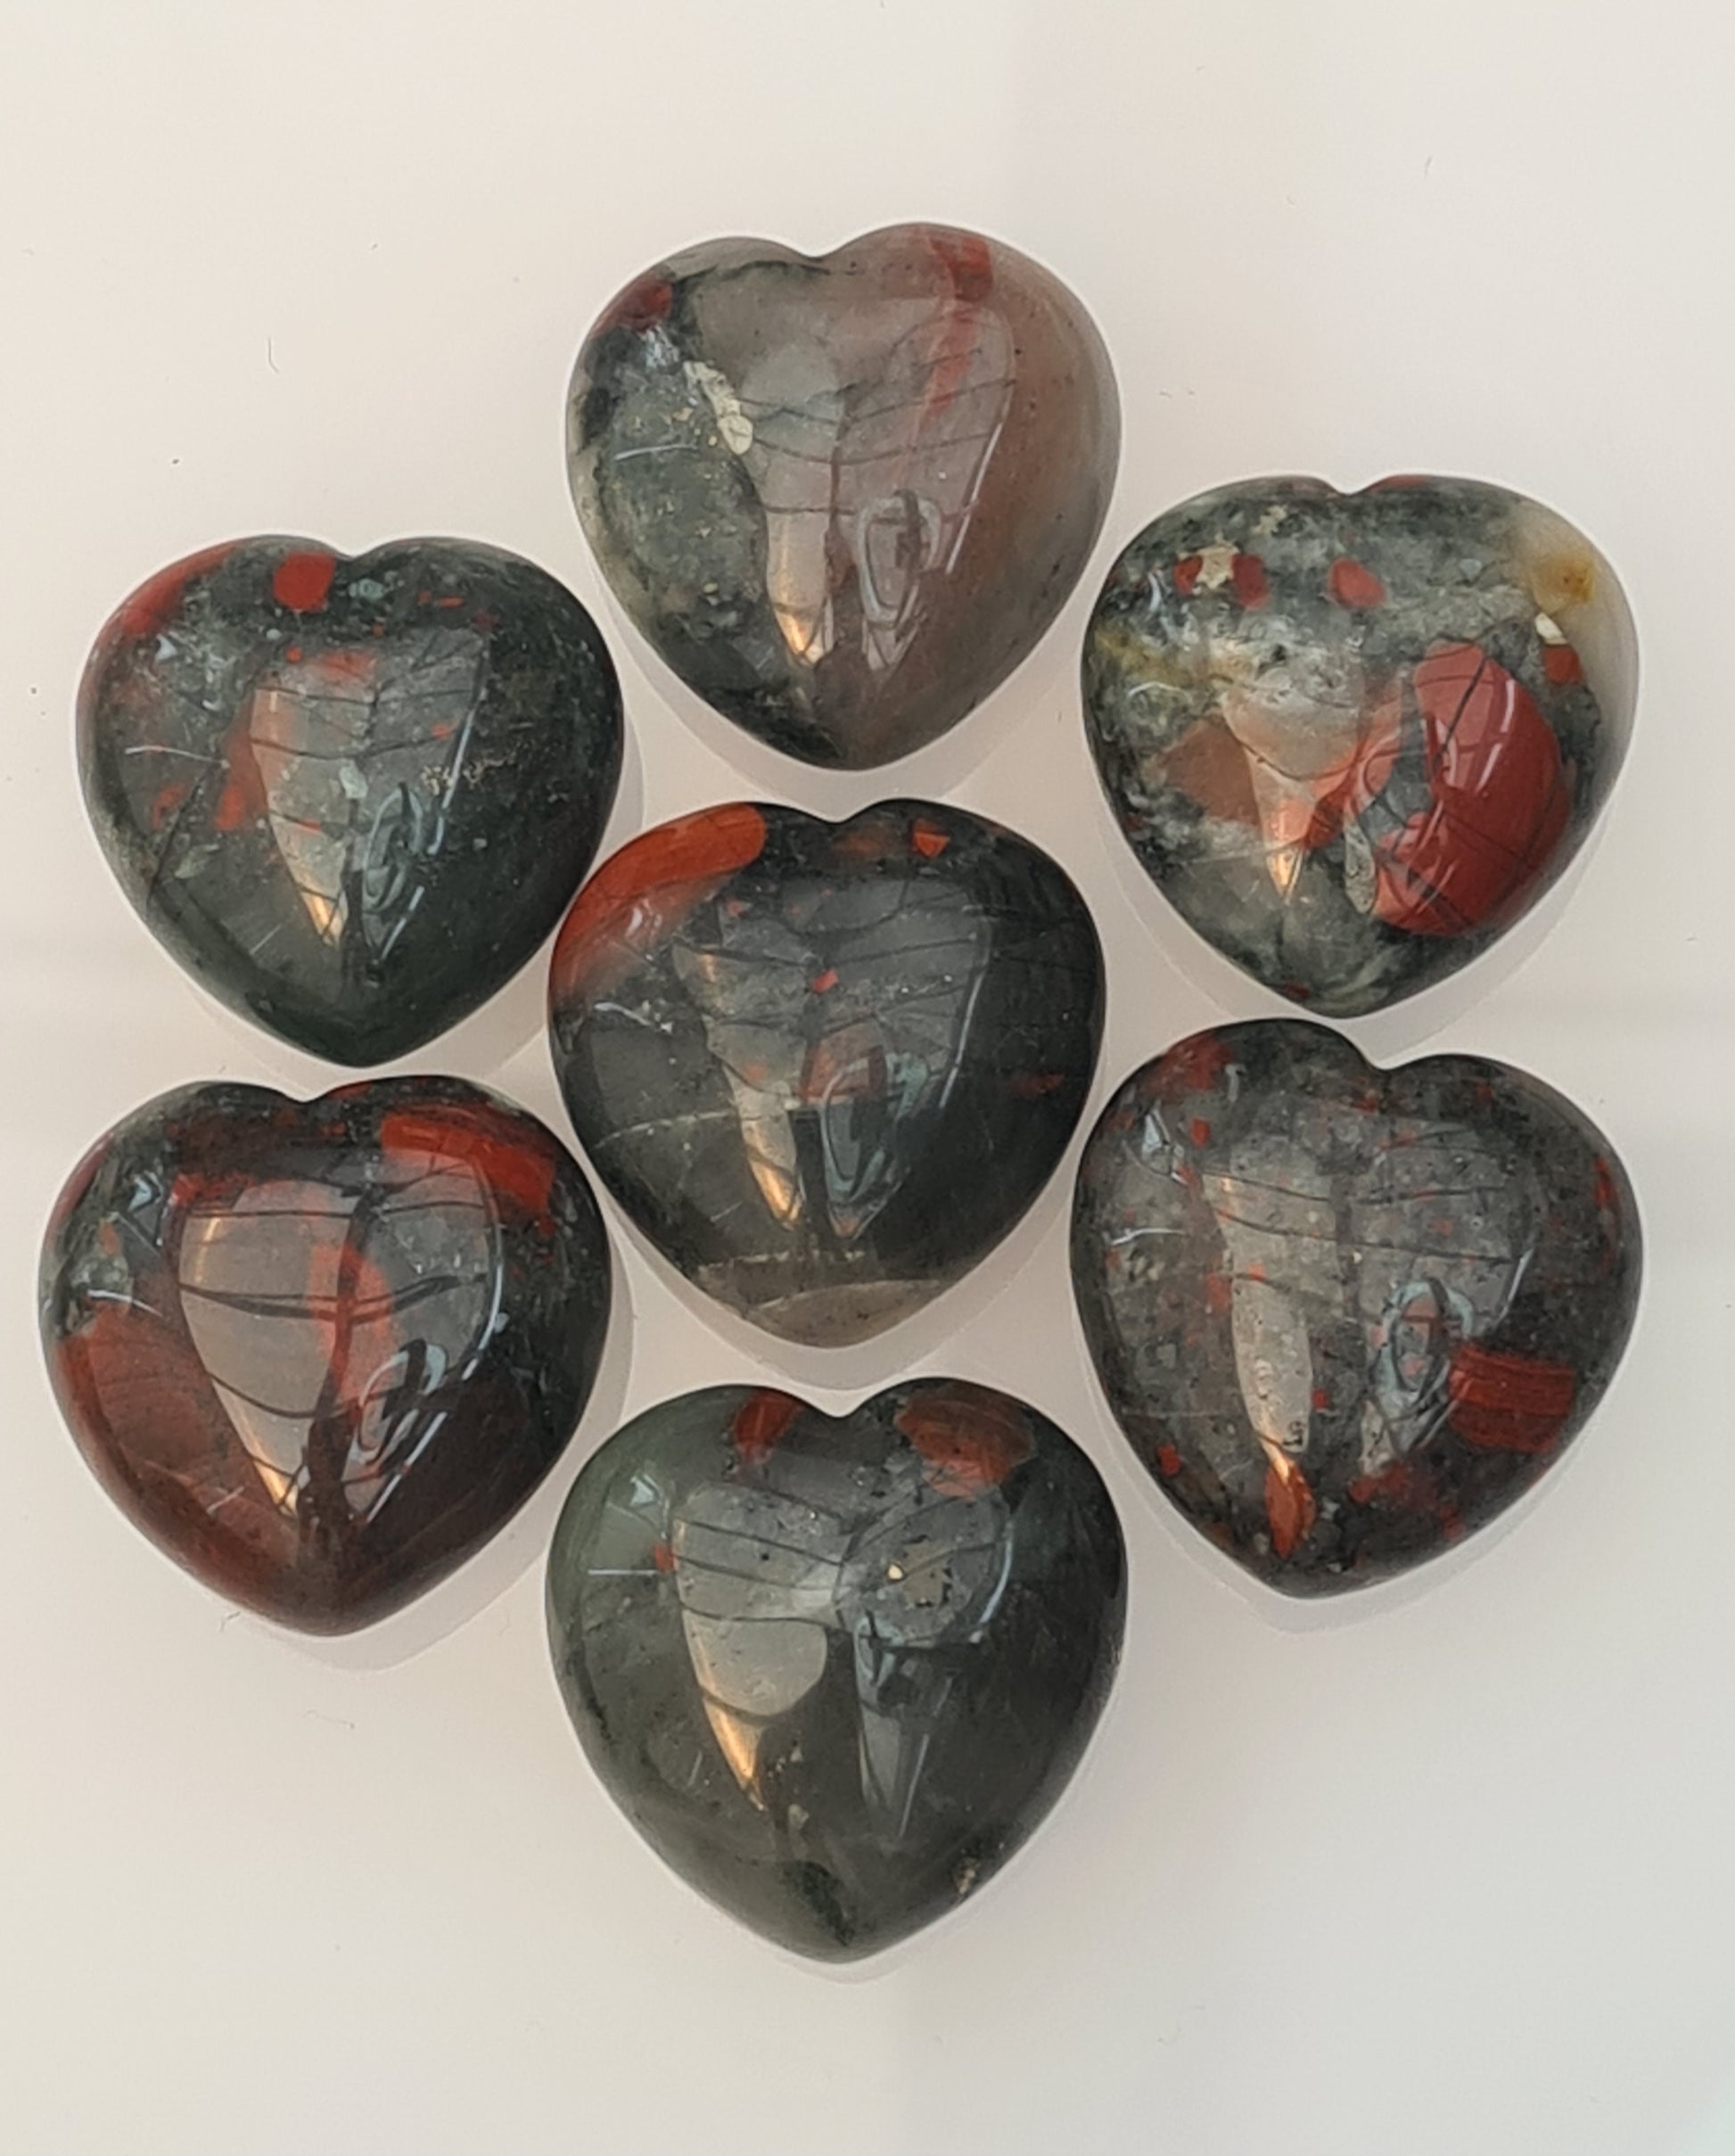 Small 3cm wide Bloodstone Hearts from Africa